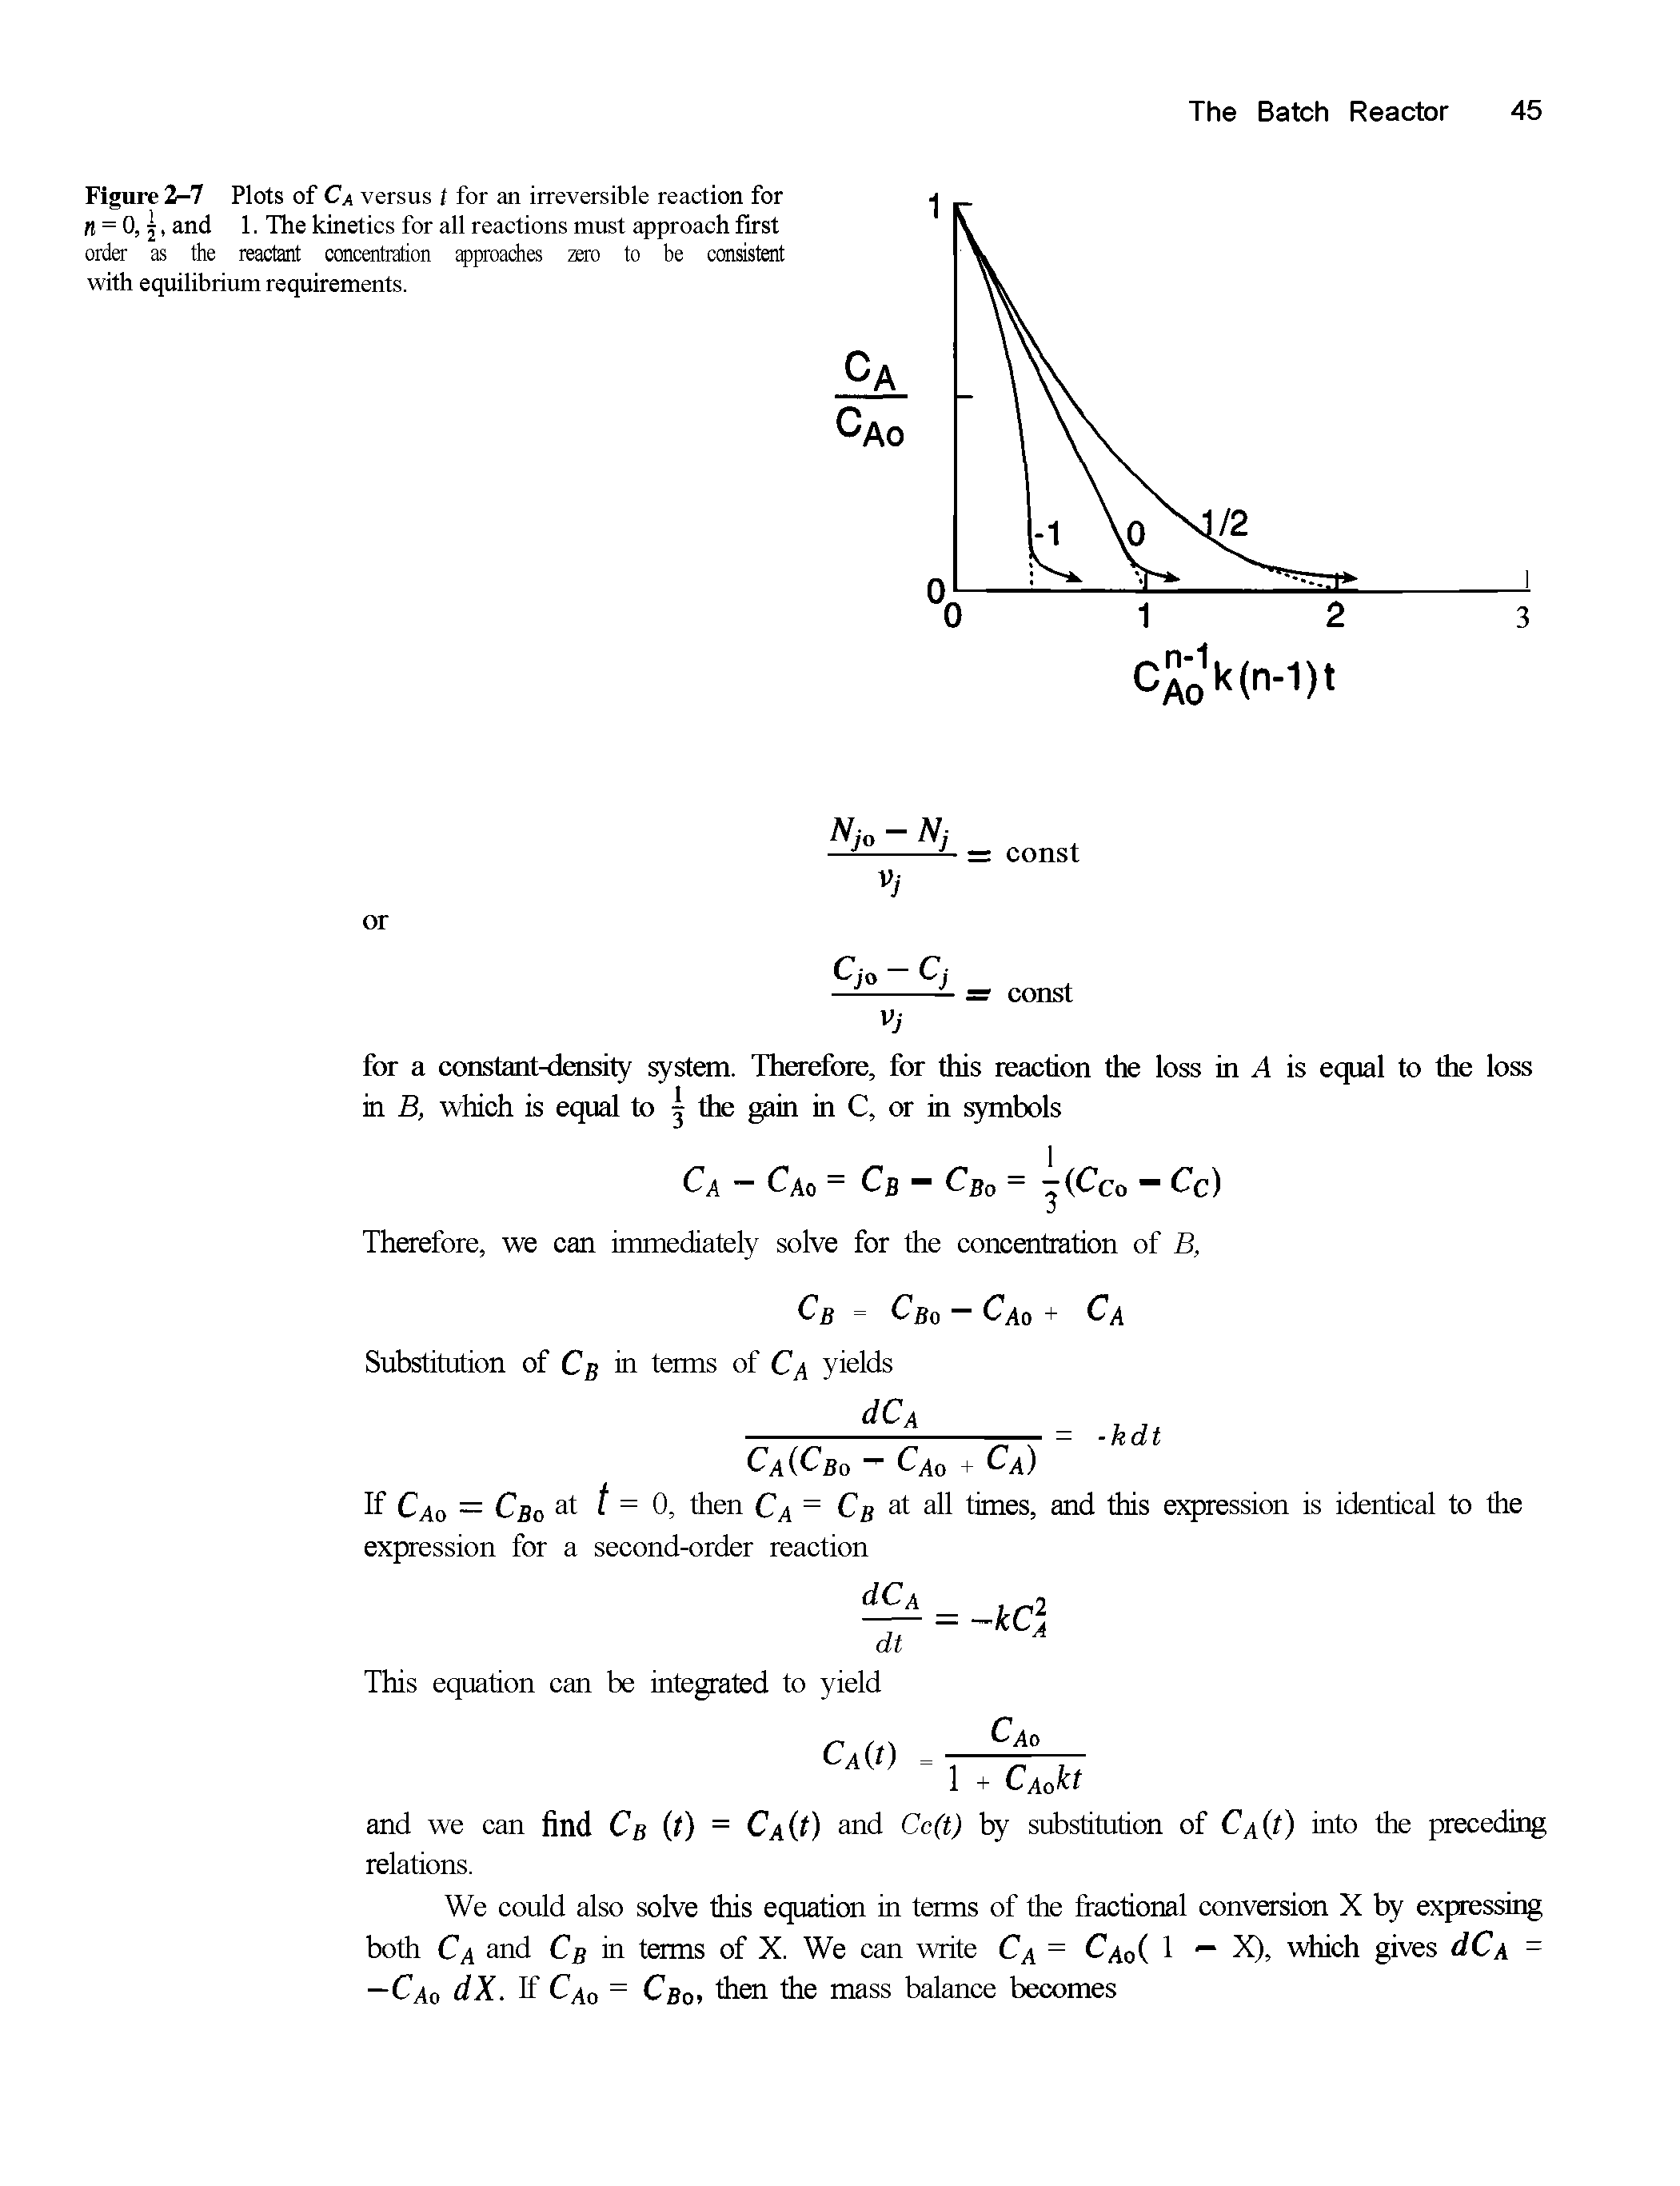 Figure 2-7 Plots of Ca versus 1 for an irreversible reaction for = 0,1, and 1. The kinetics for all reactions must approach first order as the reactant concentration approaches ro to be consistent with equilibrium requirements.